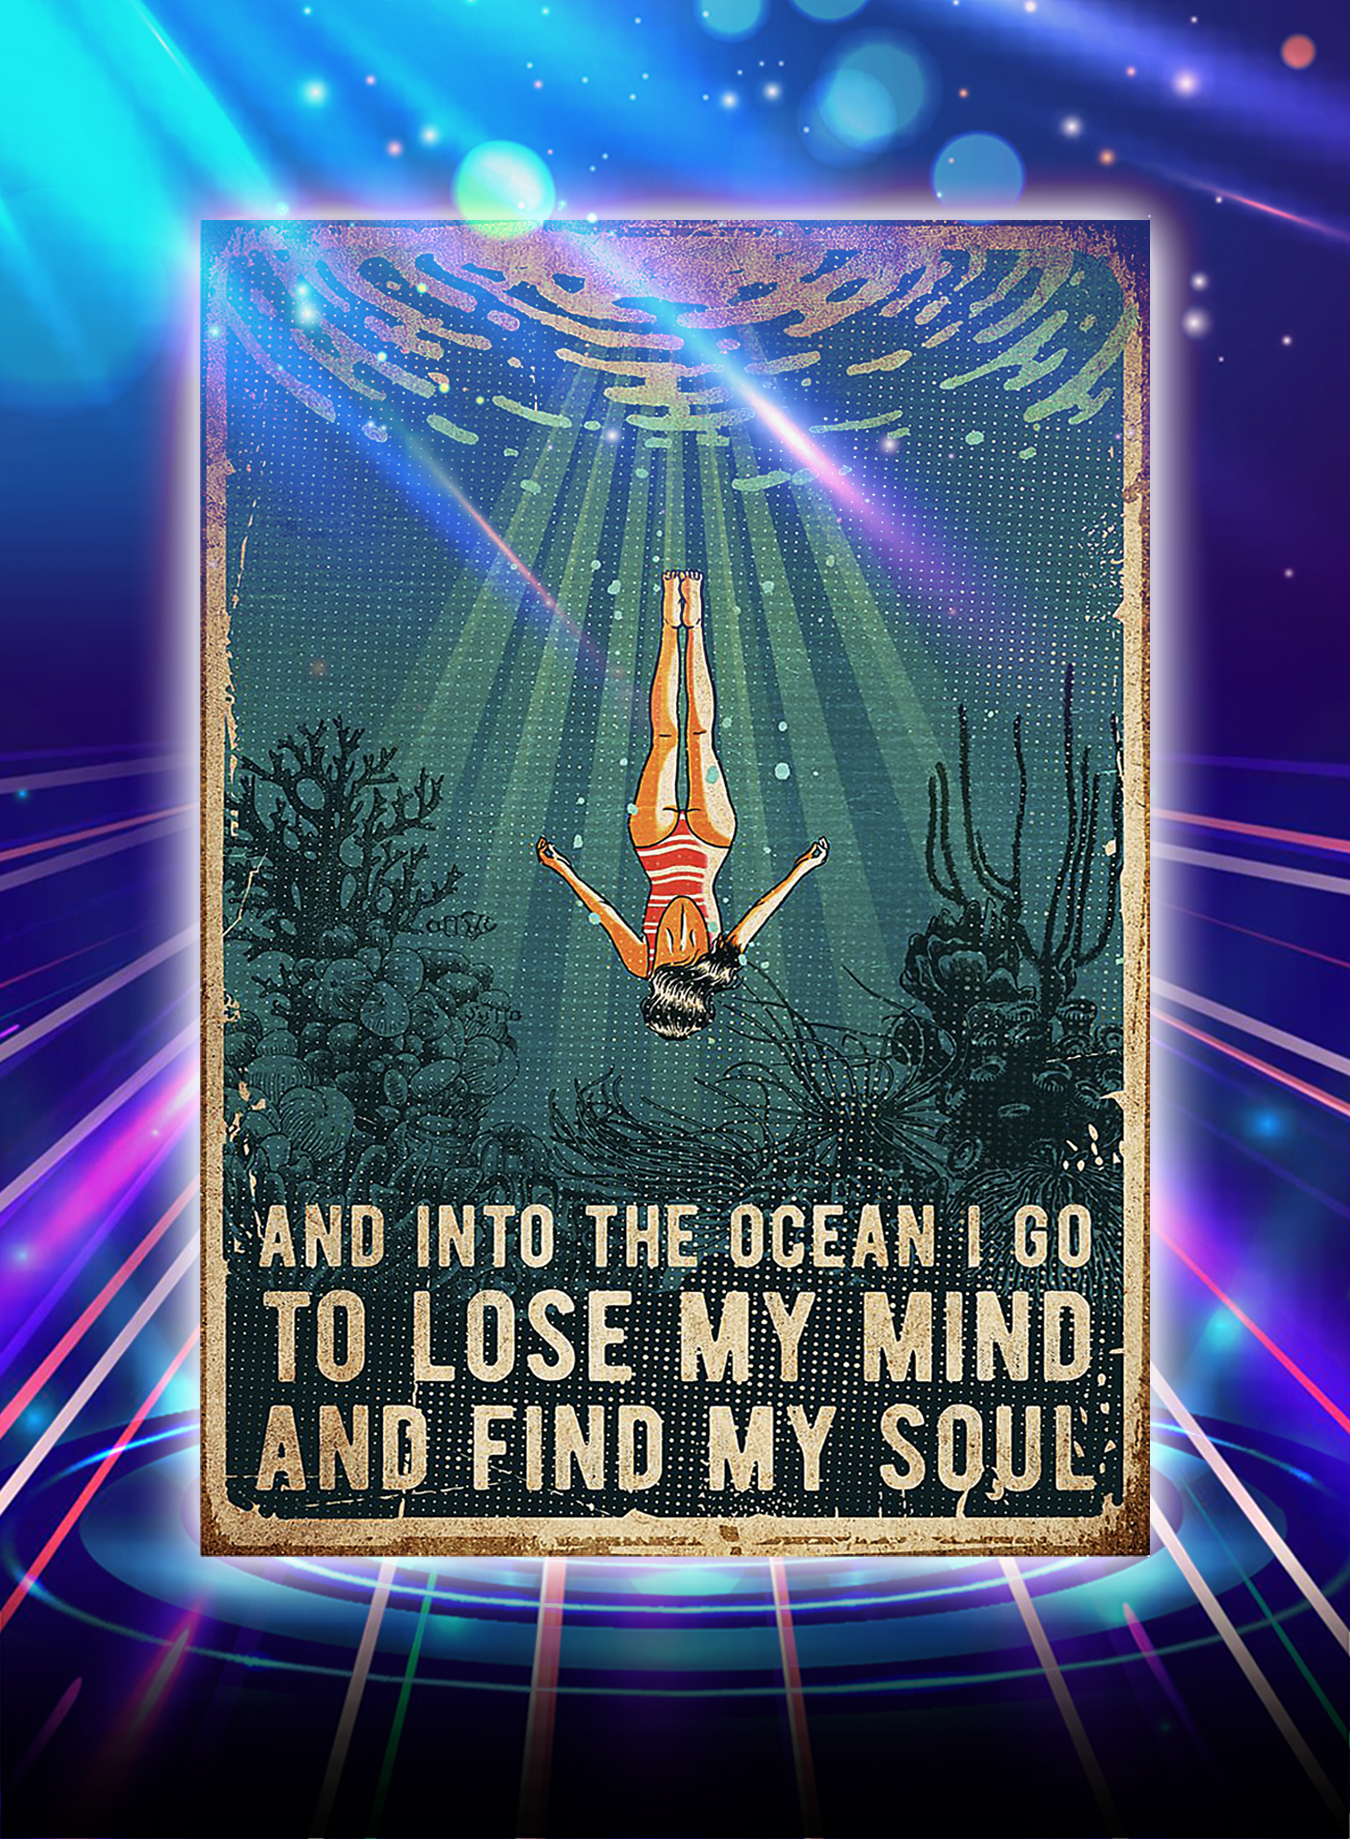 Swimming And into the ocean i go to lose my mind and find my soul poster - A2